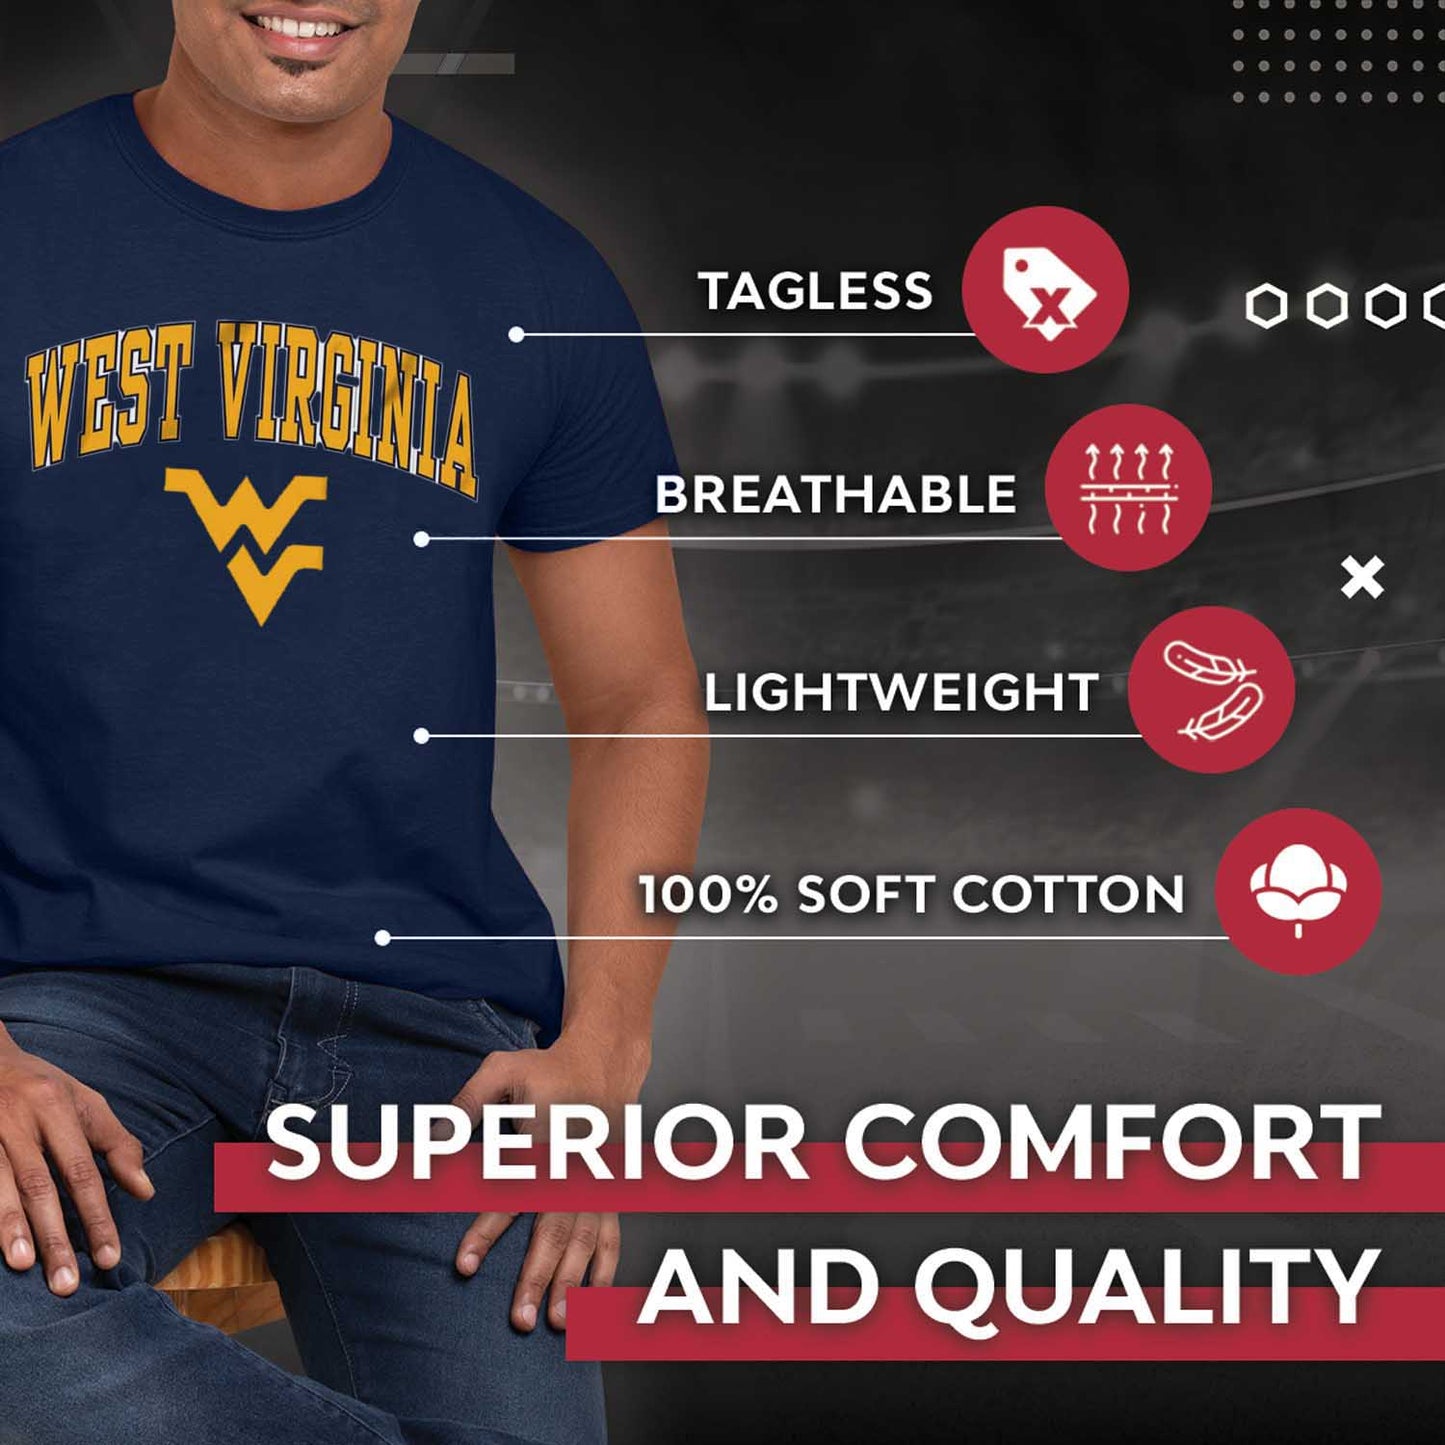 West Virginia Mountaineers NCAA Adult Gameday Cotton T-Shirt - Navy